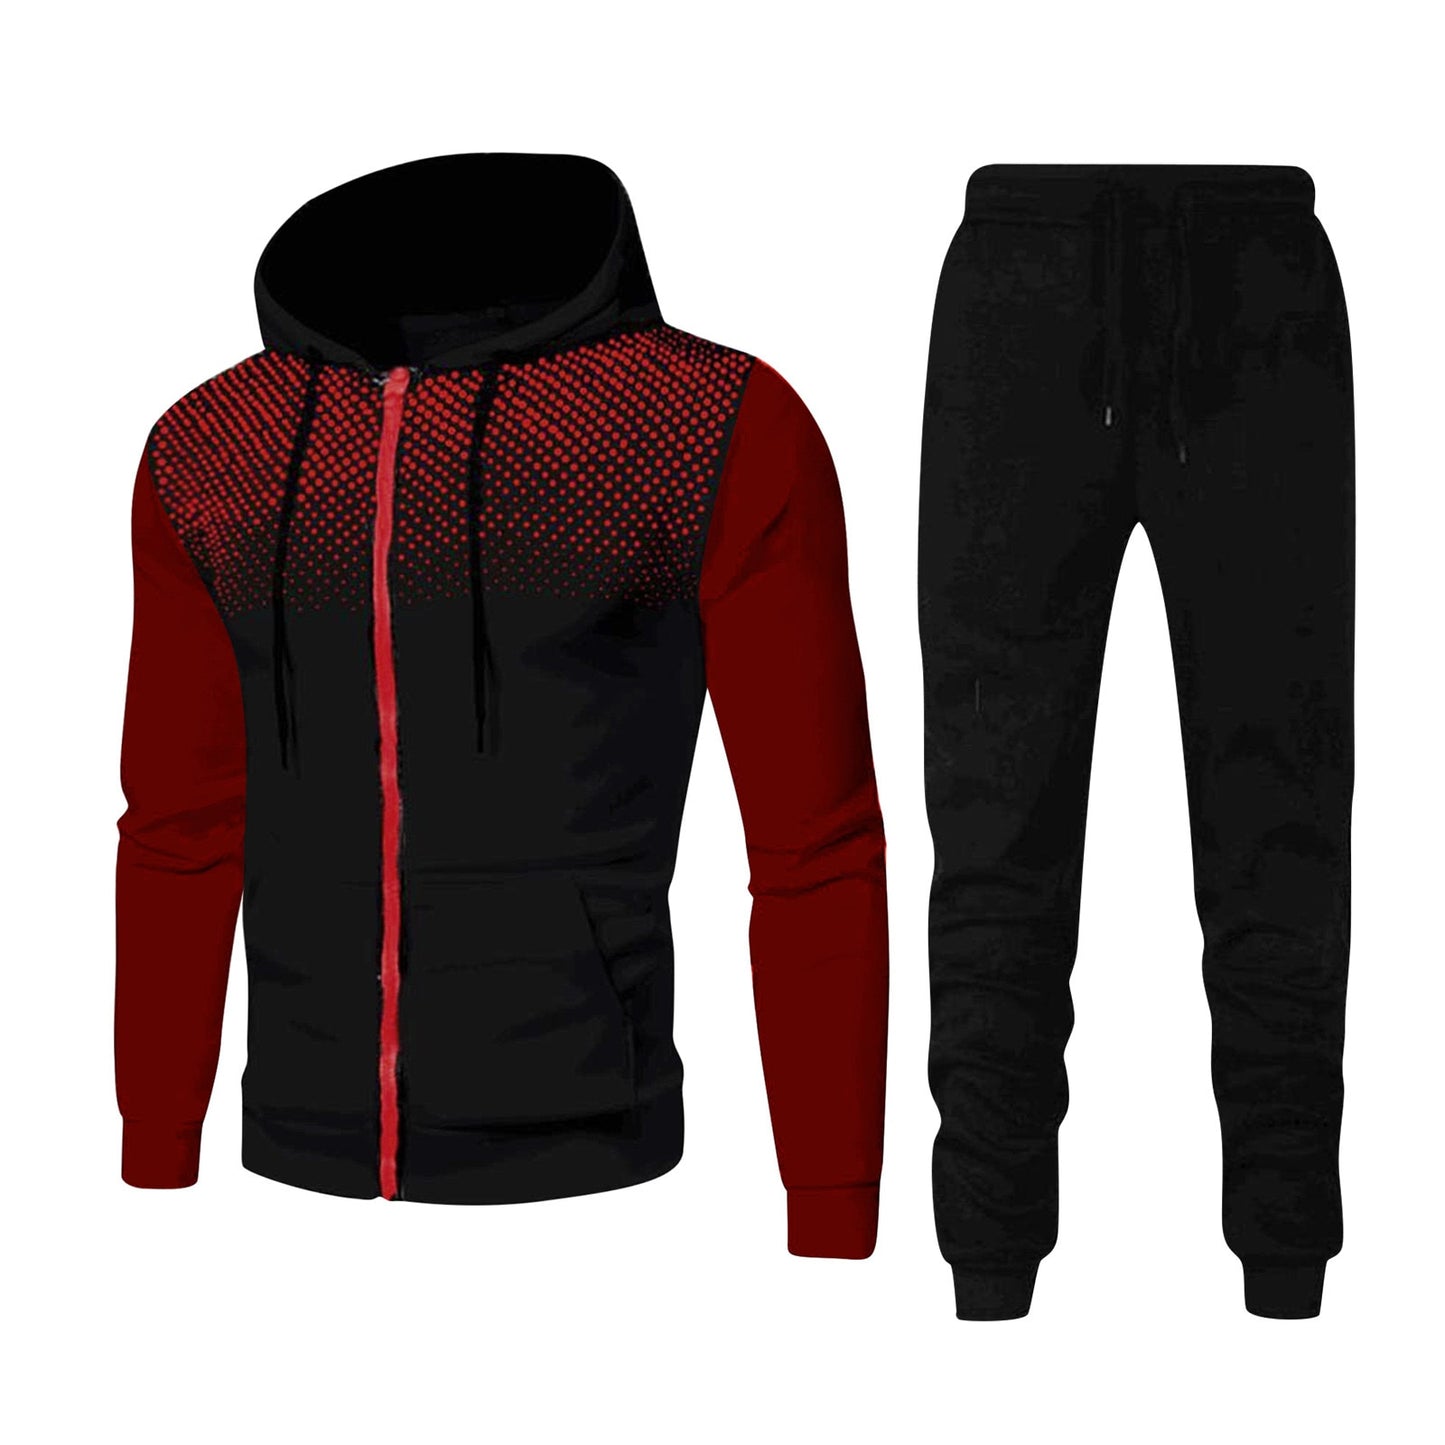 2023 Men's Sets Hoodies+pants Autumn And Winter Sport Suits Casual Sweatshirts Tracksuit Sportswear